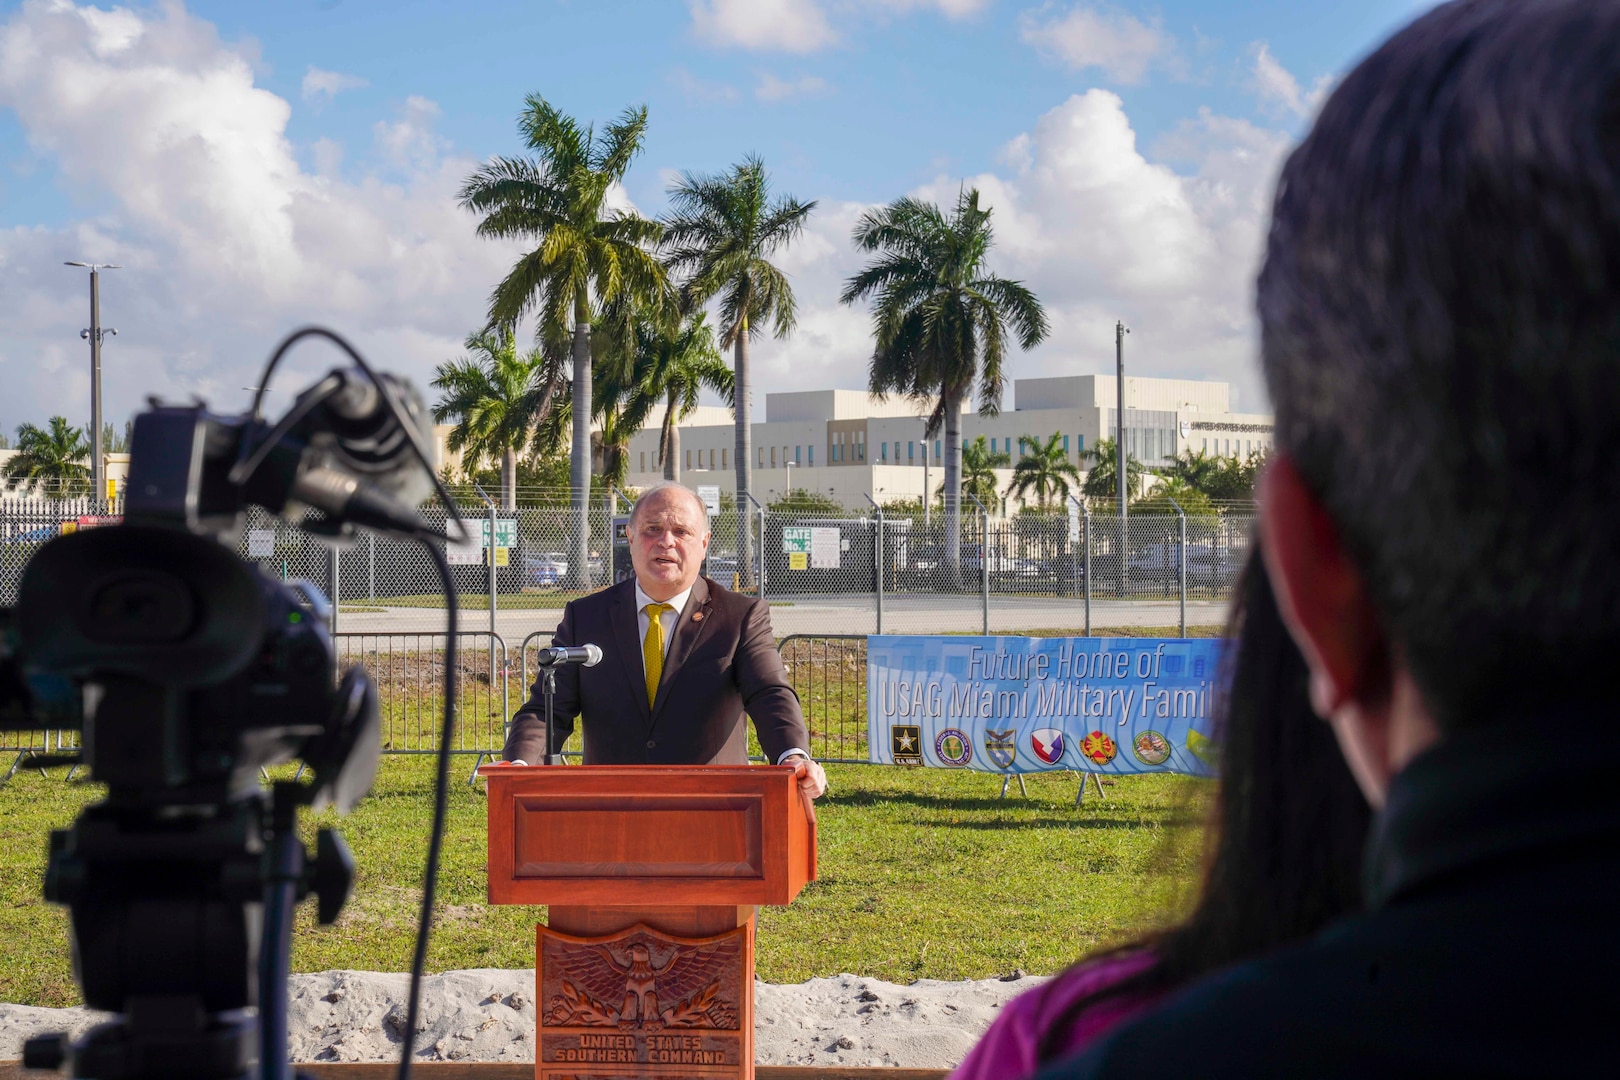 Commissioner Juan Carlos Bermudez, District 12 commissioner for the Miami-Dade Board of County Commissioners, speaks during a groundbreaking ceremony for the future site of the new military housing complex supporting U.S. Southern Command's service members and their families.